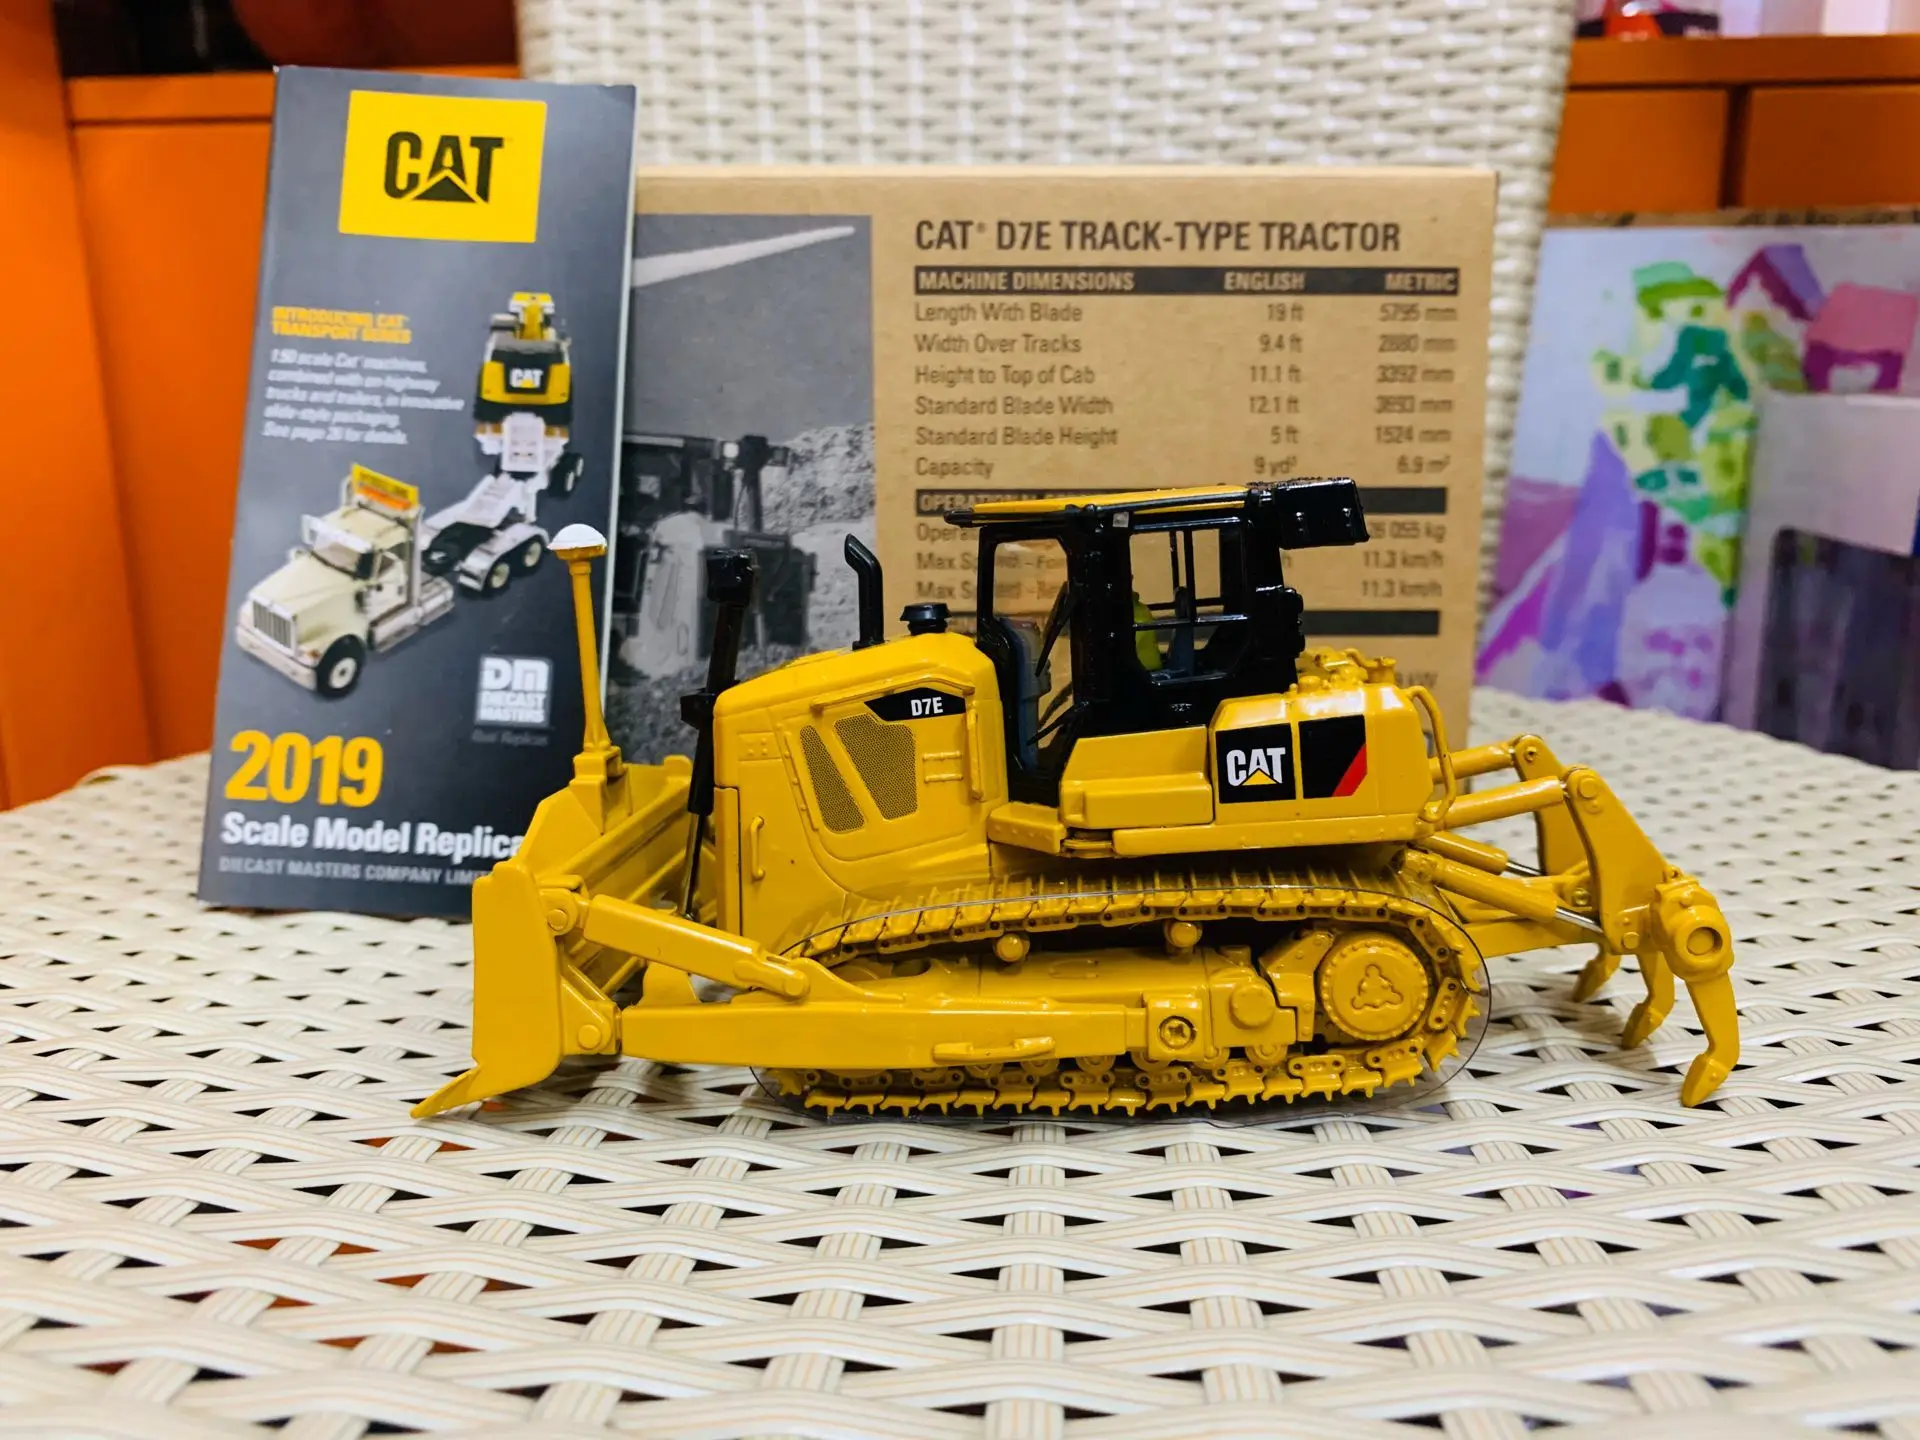 Caterpiller Cat D7E Track-Type Tractor 1:50 Scale Metal Model 85224 By Diecast Masters